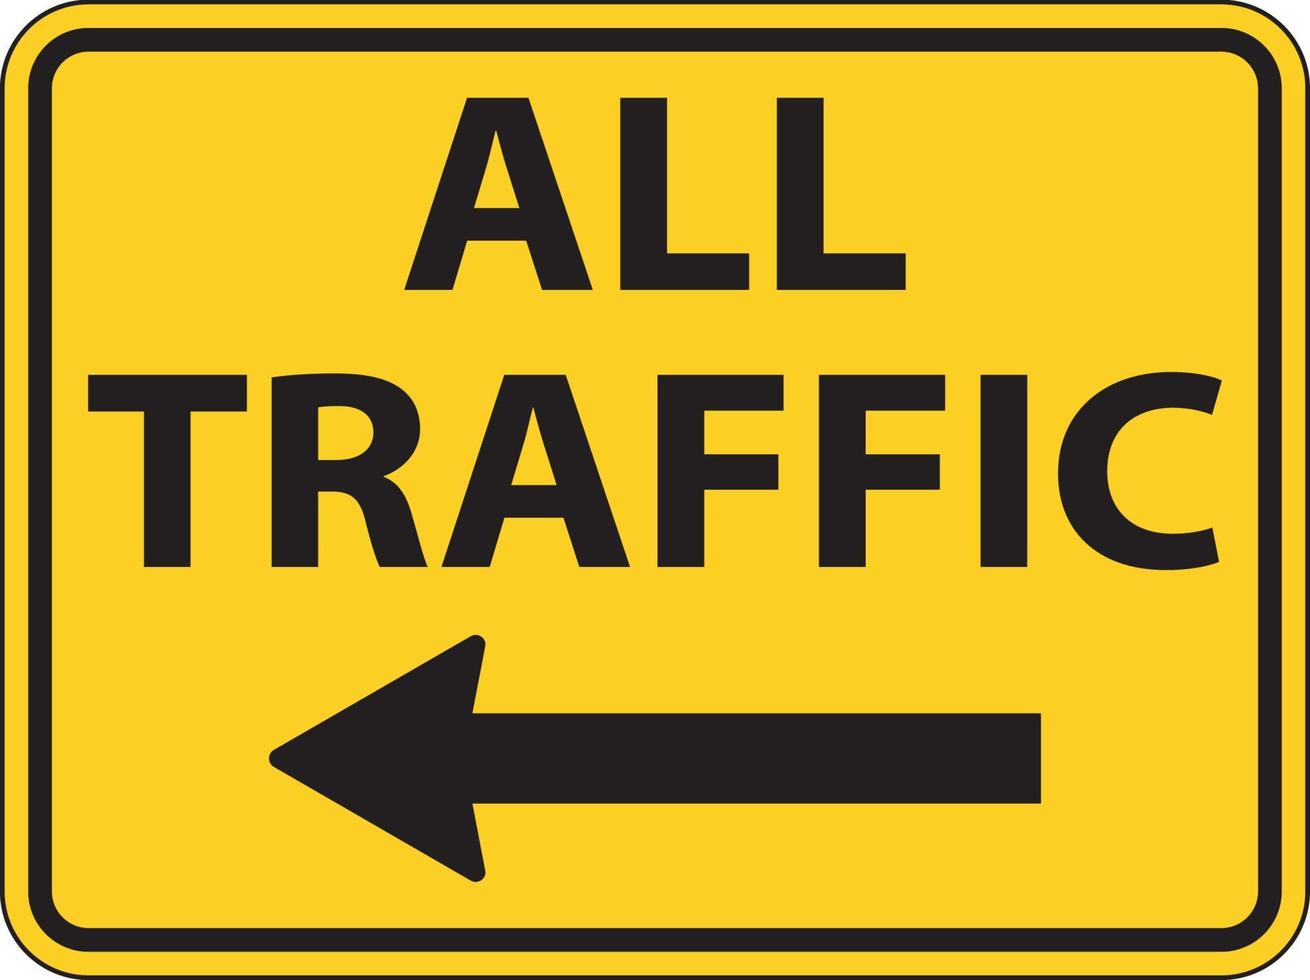 All Traffic Left Arrow Sign On White Background vector